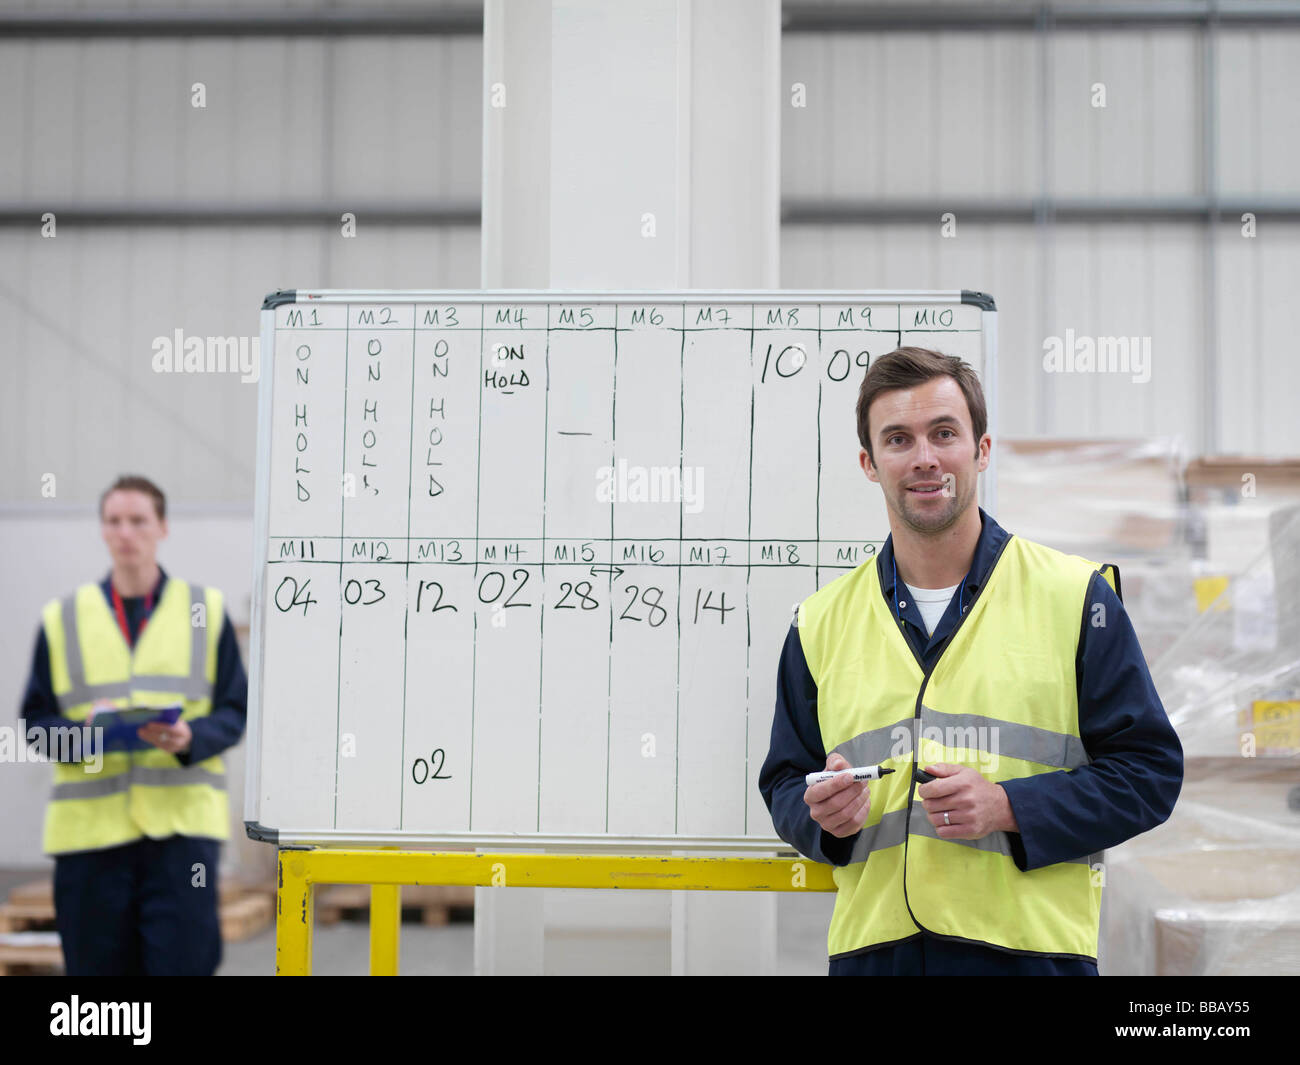 Workers With Whiteboard In Warehouse Stock Photo